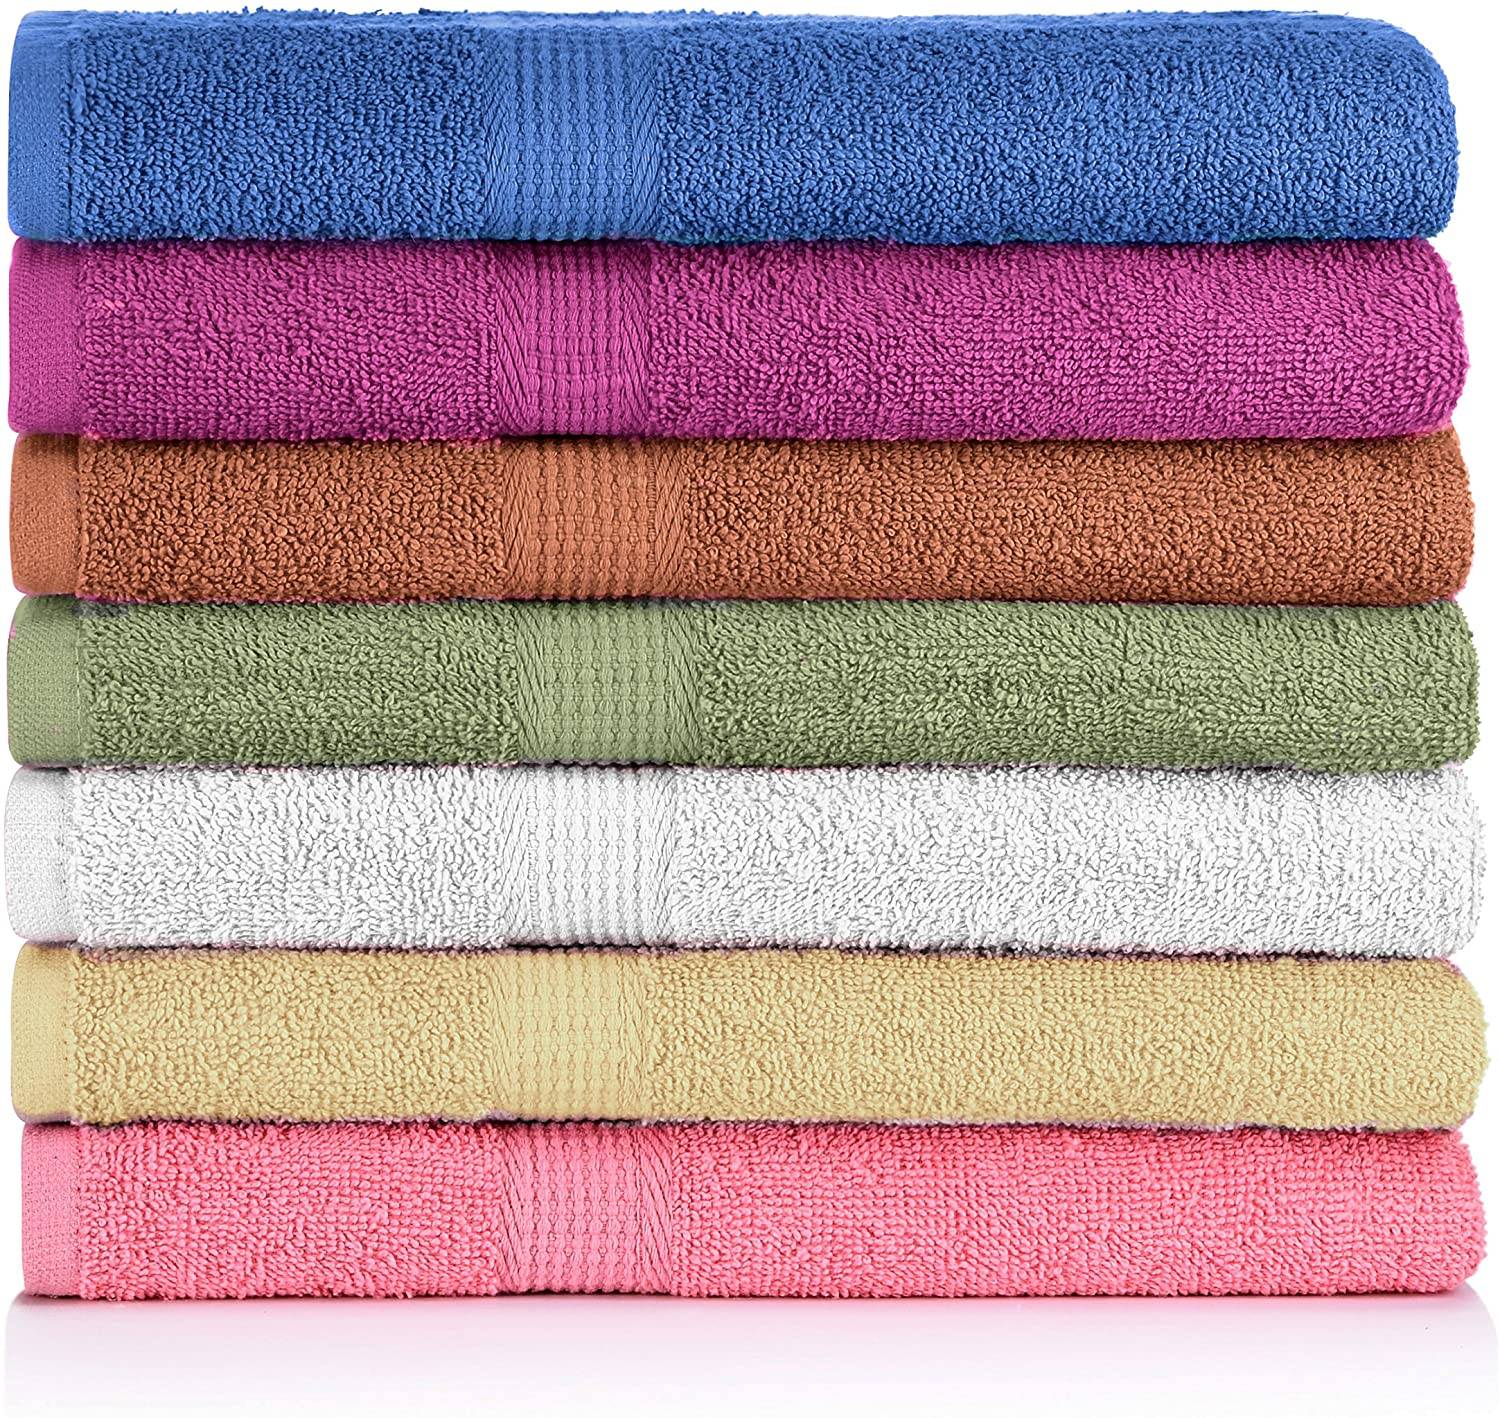 PriceList for Opened Hooded Towel - Towels/beach towel/ Bath Towels ,Extra-Absorbent – 100% Cotton – 27×54” Towels, Soft and Quick Dry Swim Terry towels with bright colors   ̵...